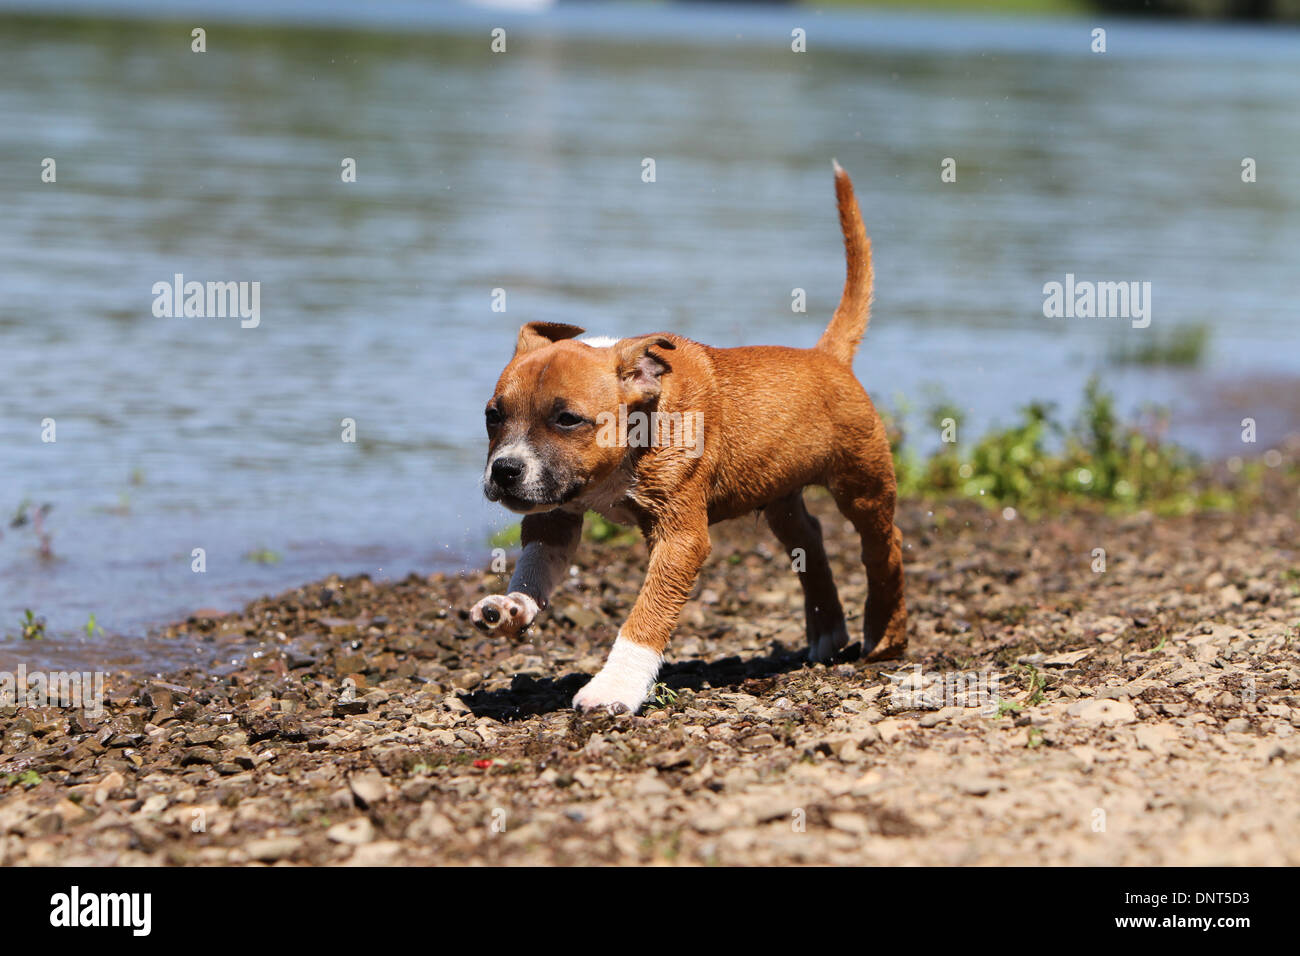 dog Staffordshire Bull Terrier / Staffie  puppy running at the edge of a lake Stock Photo